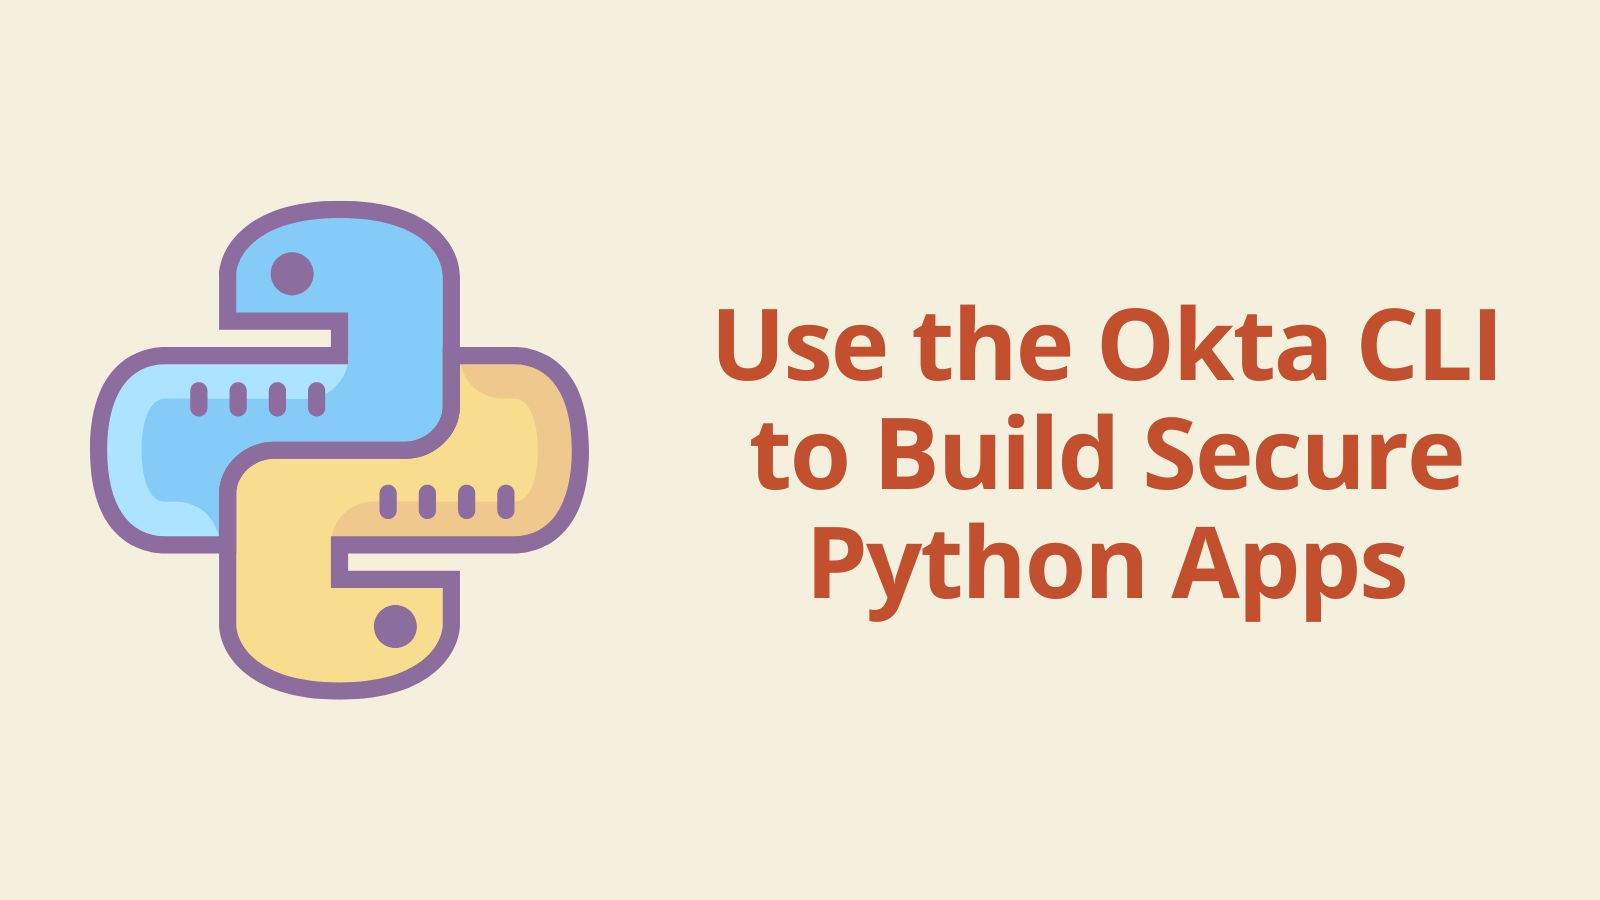 Use the Okta CLI to Build Secure Python Apps